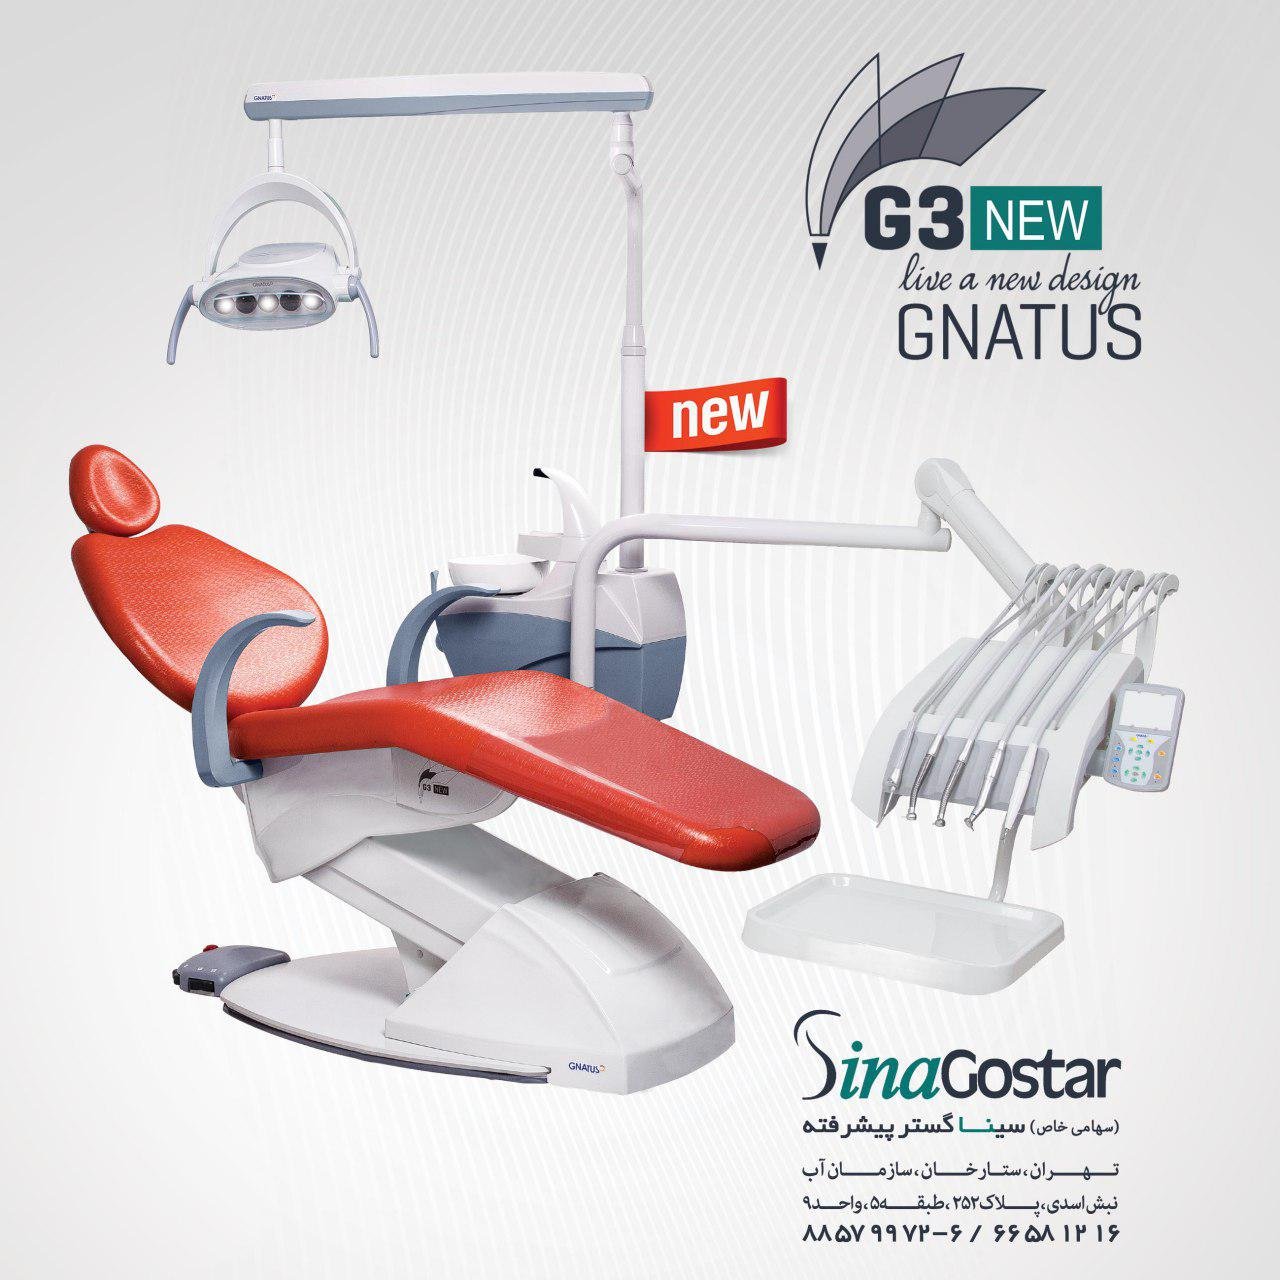 Dental chair model G3 New made by GNATUS Brazil